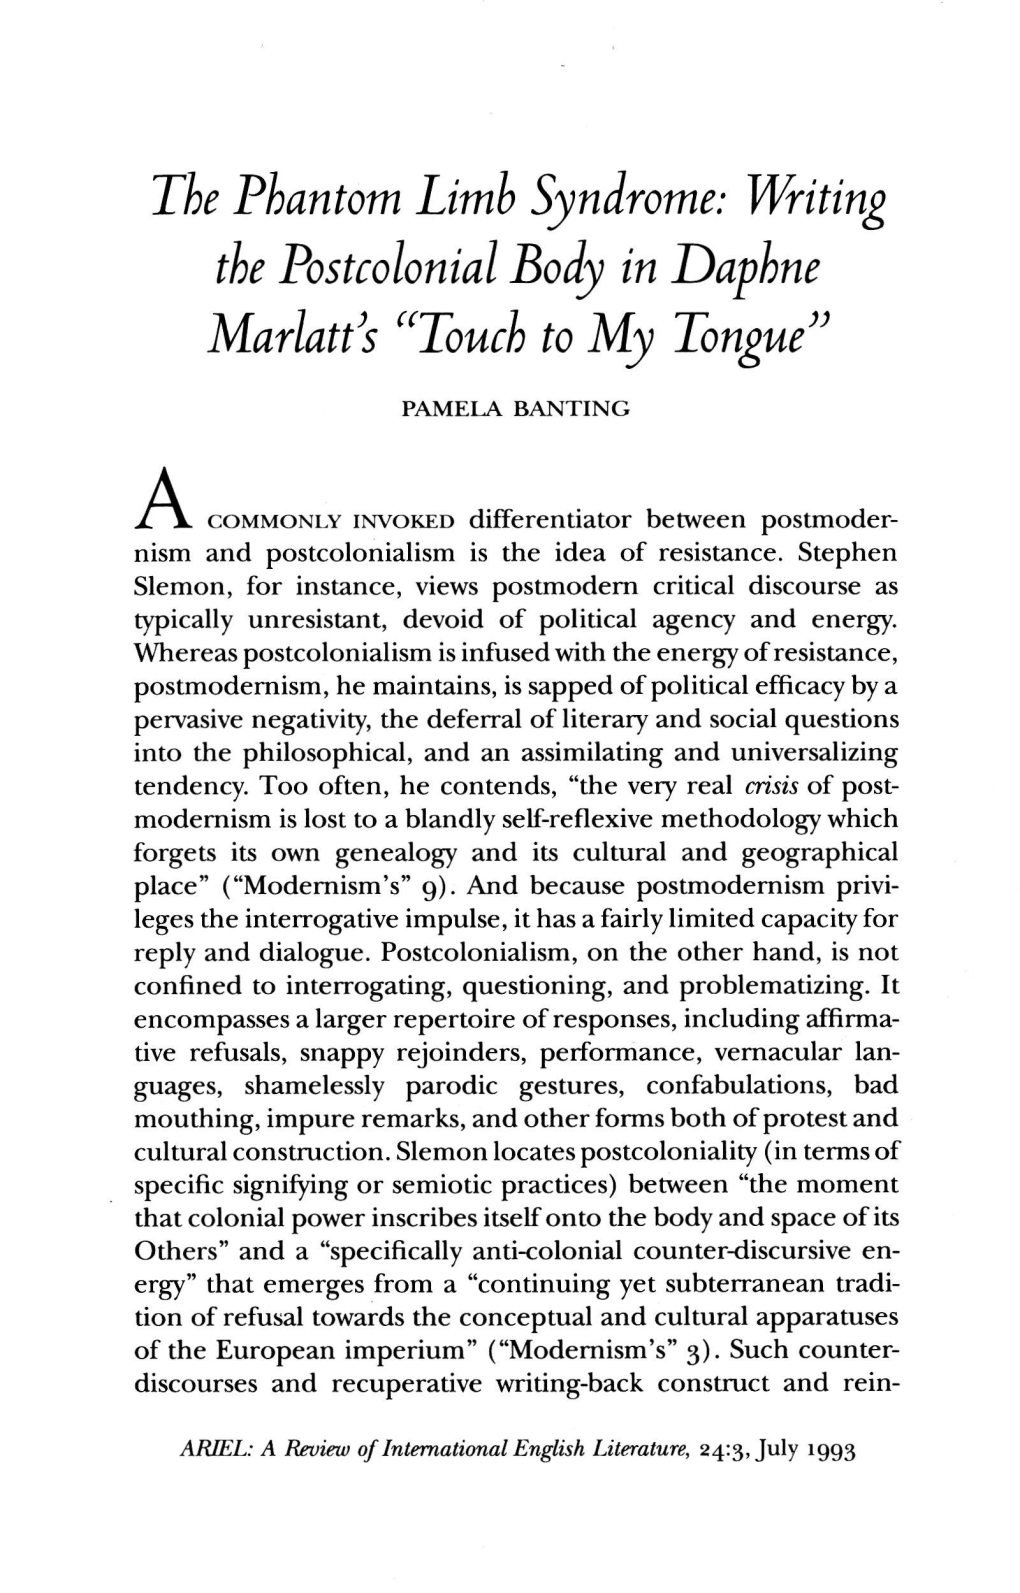 Writing the Postcolonial Body in Daphne Marlatñ "Touch to My Tongue"